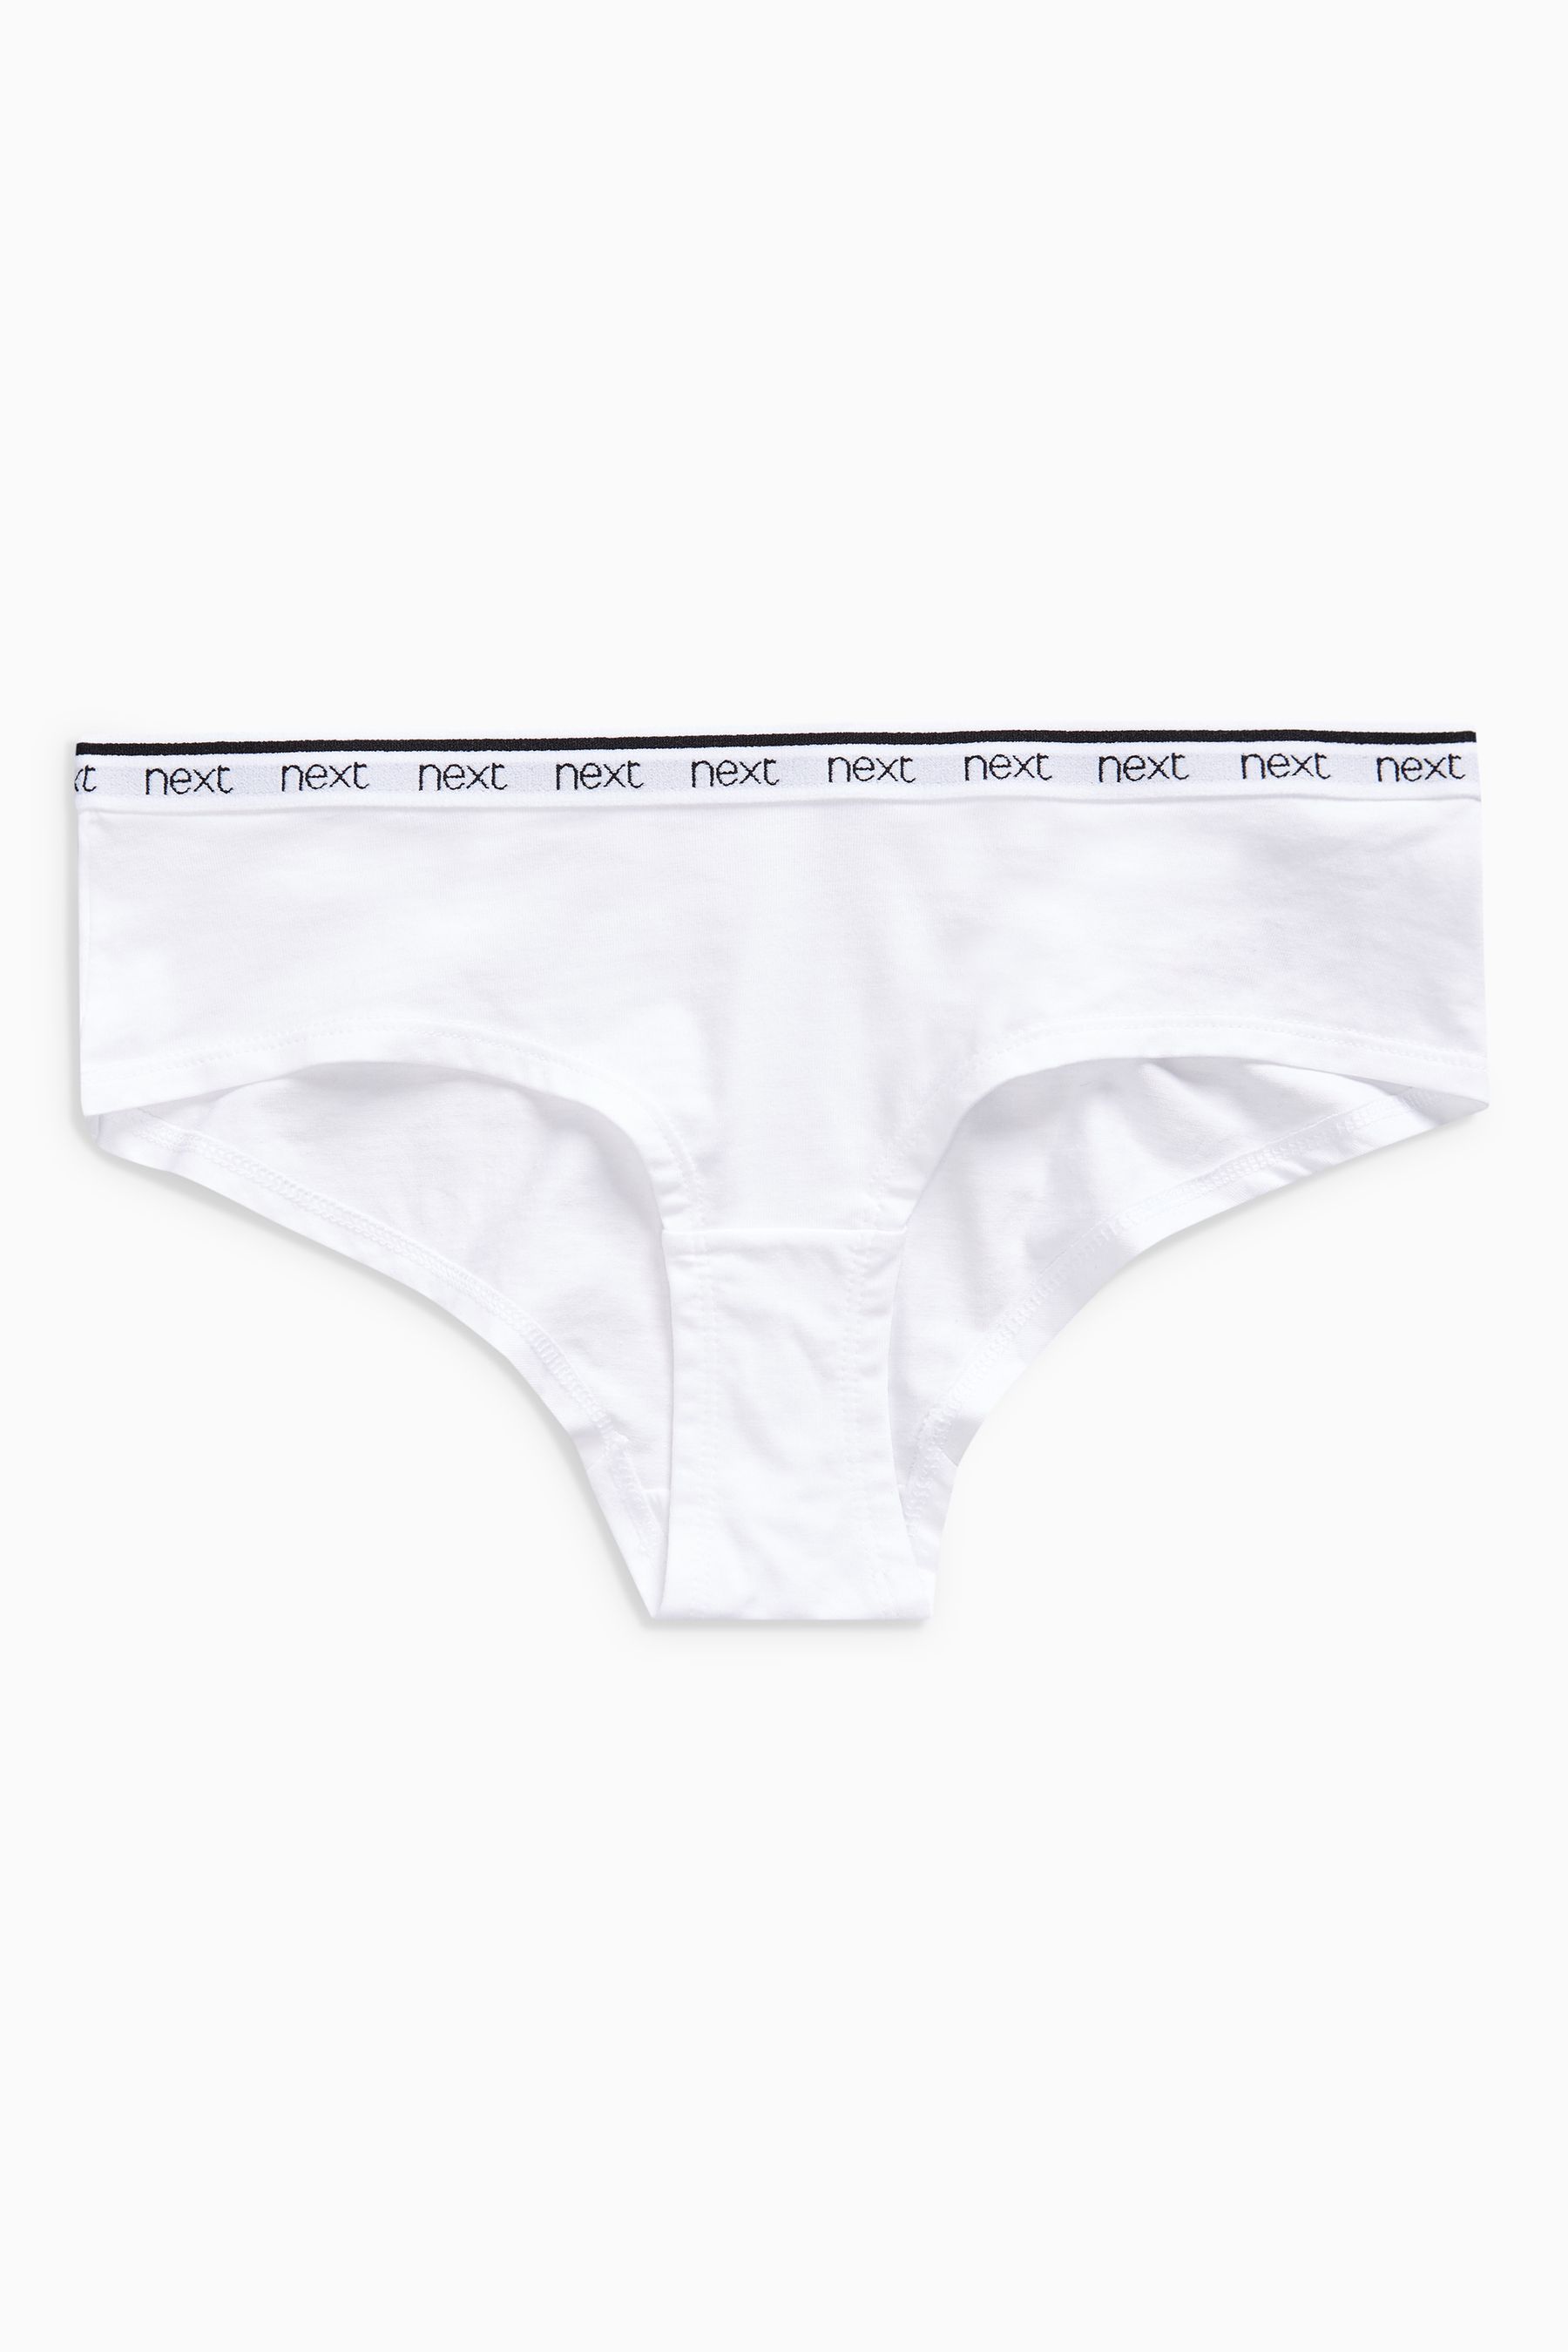 Cotton Rich Logo Knickers 4 Pack Short